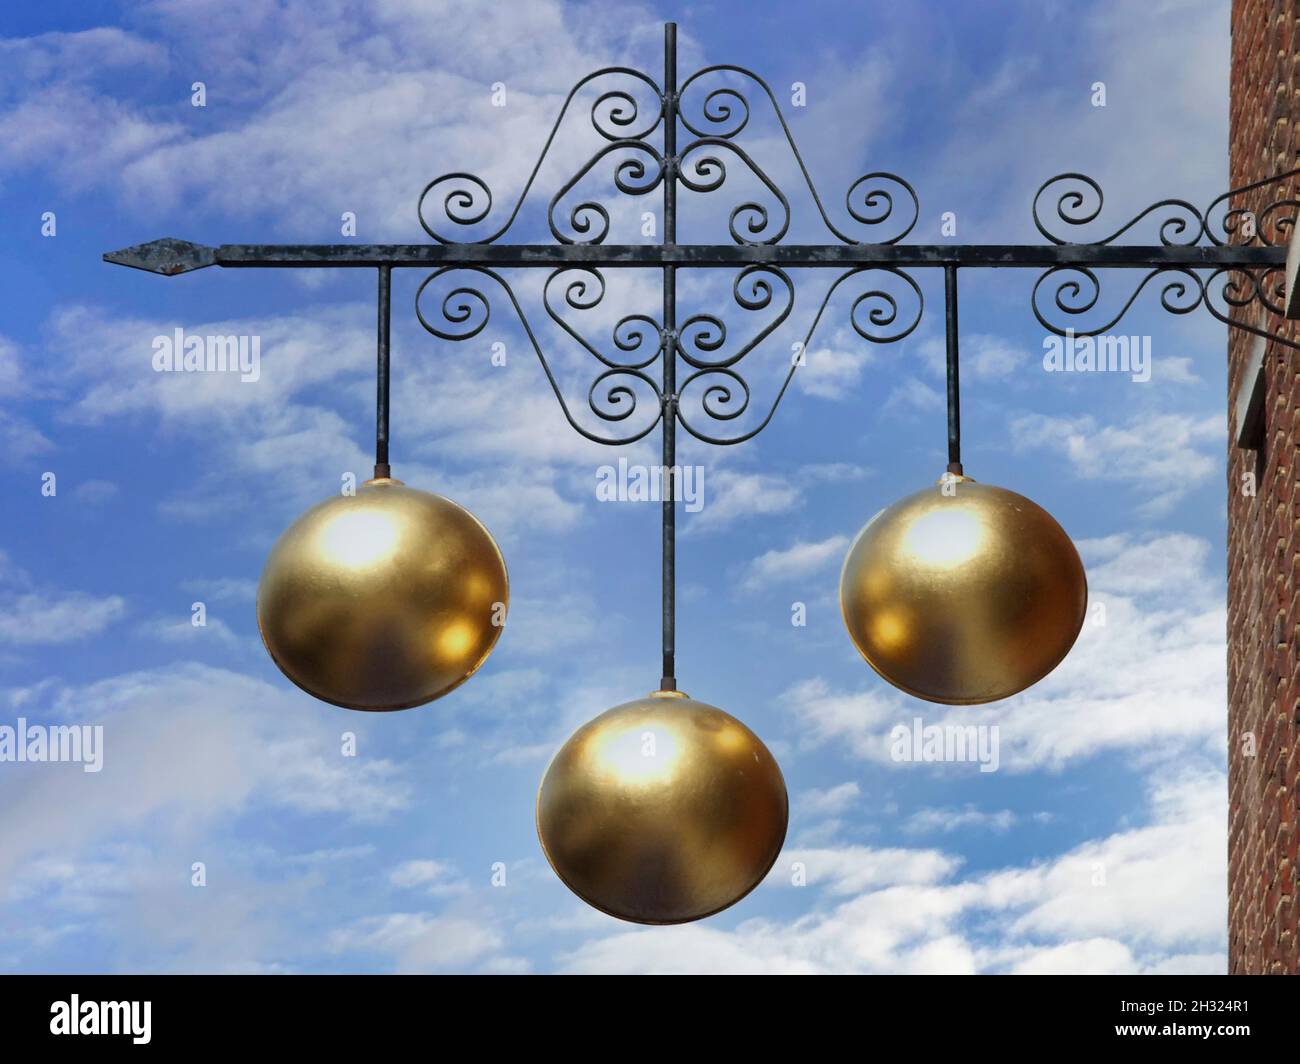 Pawn shop close up traditional sign three gold balls above Pawnbroker shop premises supported on ornamental iron bracket on a blue sky day England UK Stock Photo